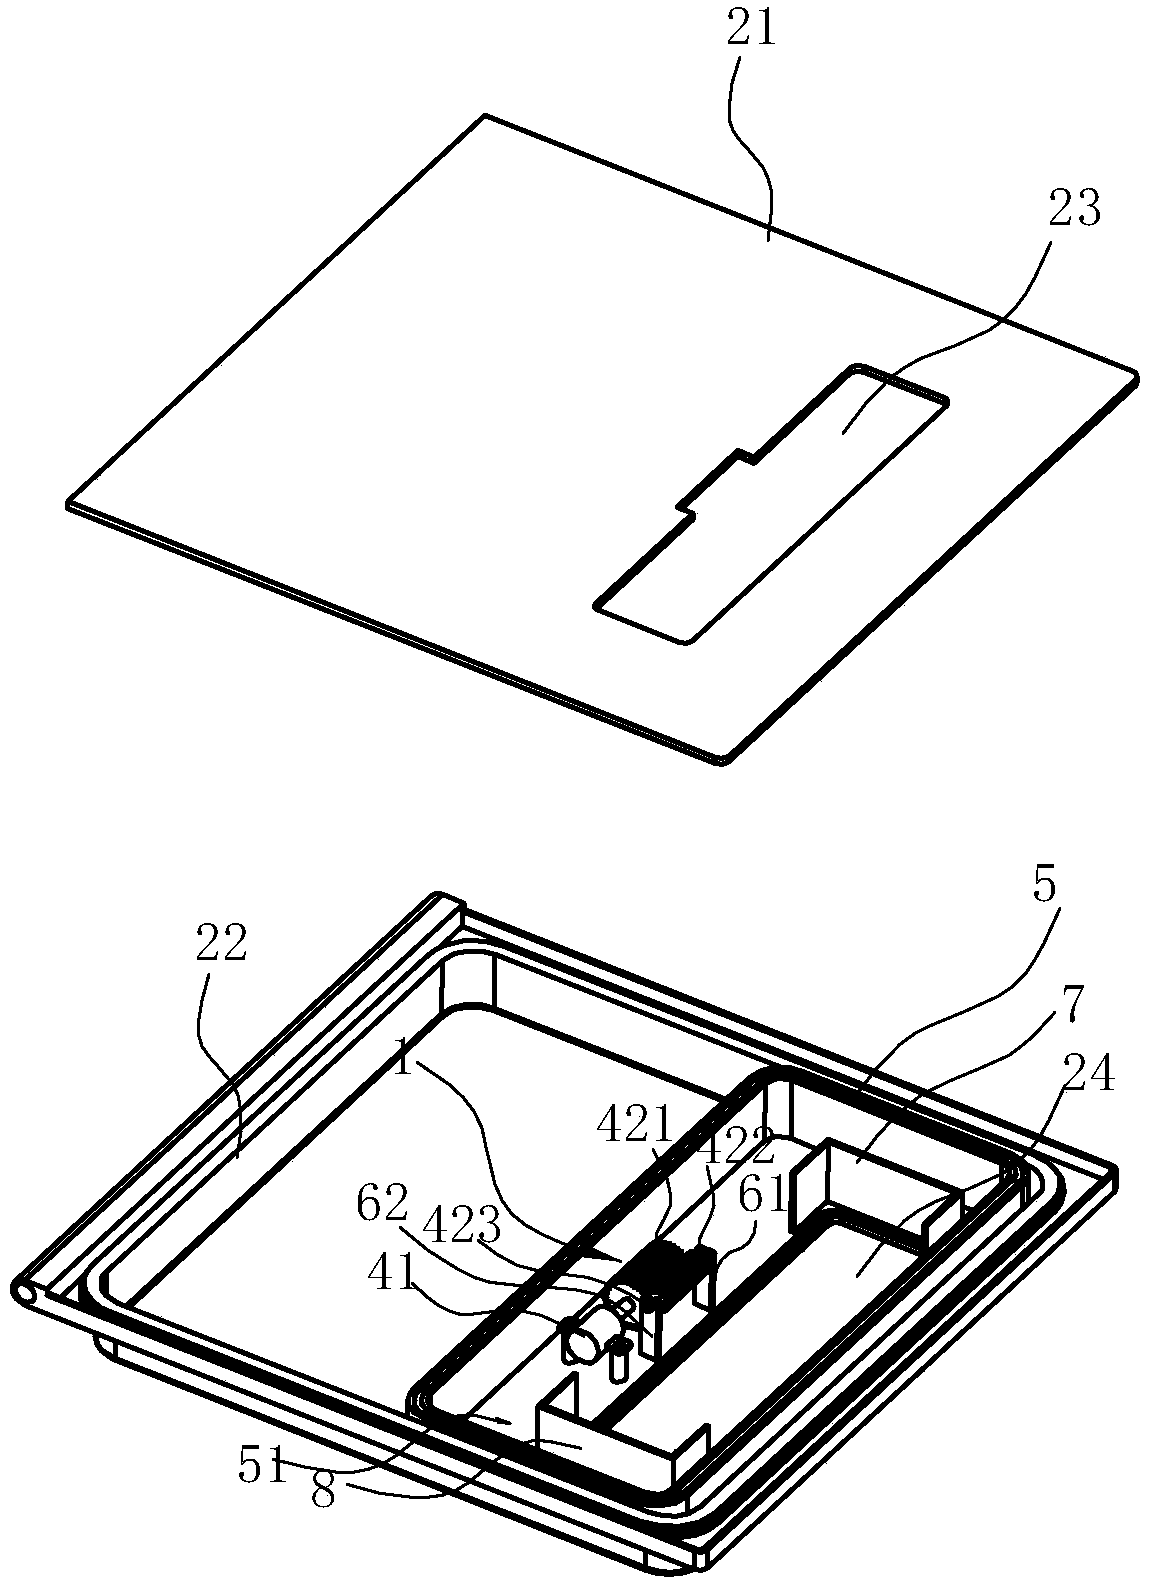 Sink-type cleaning machine